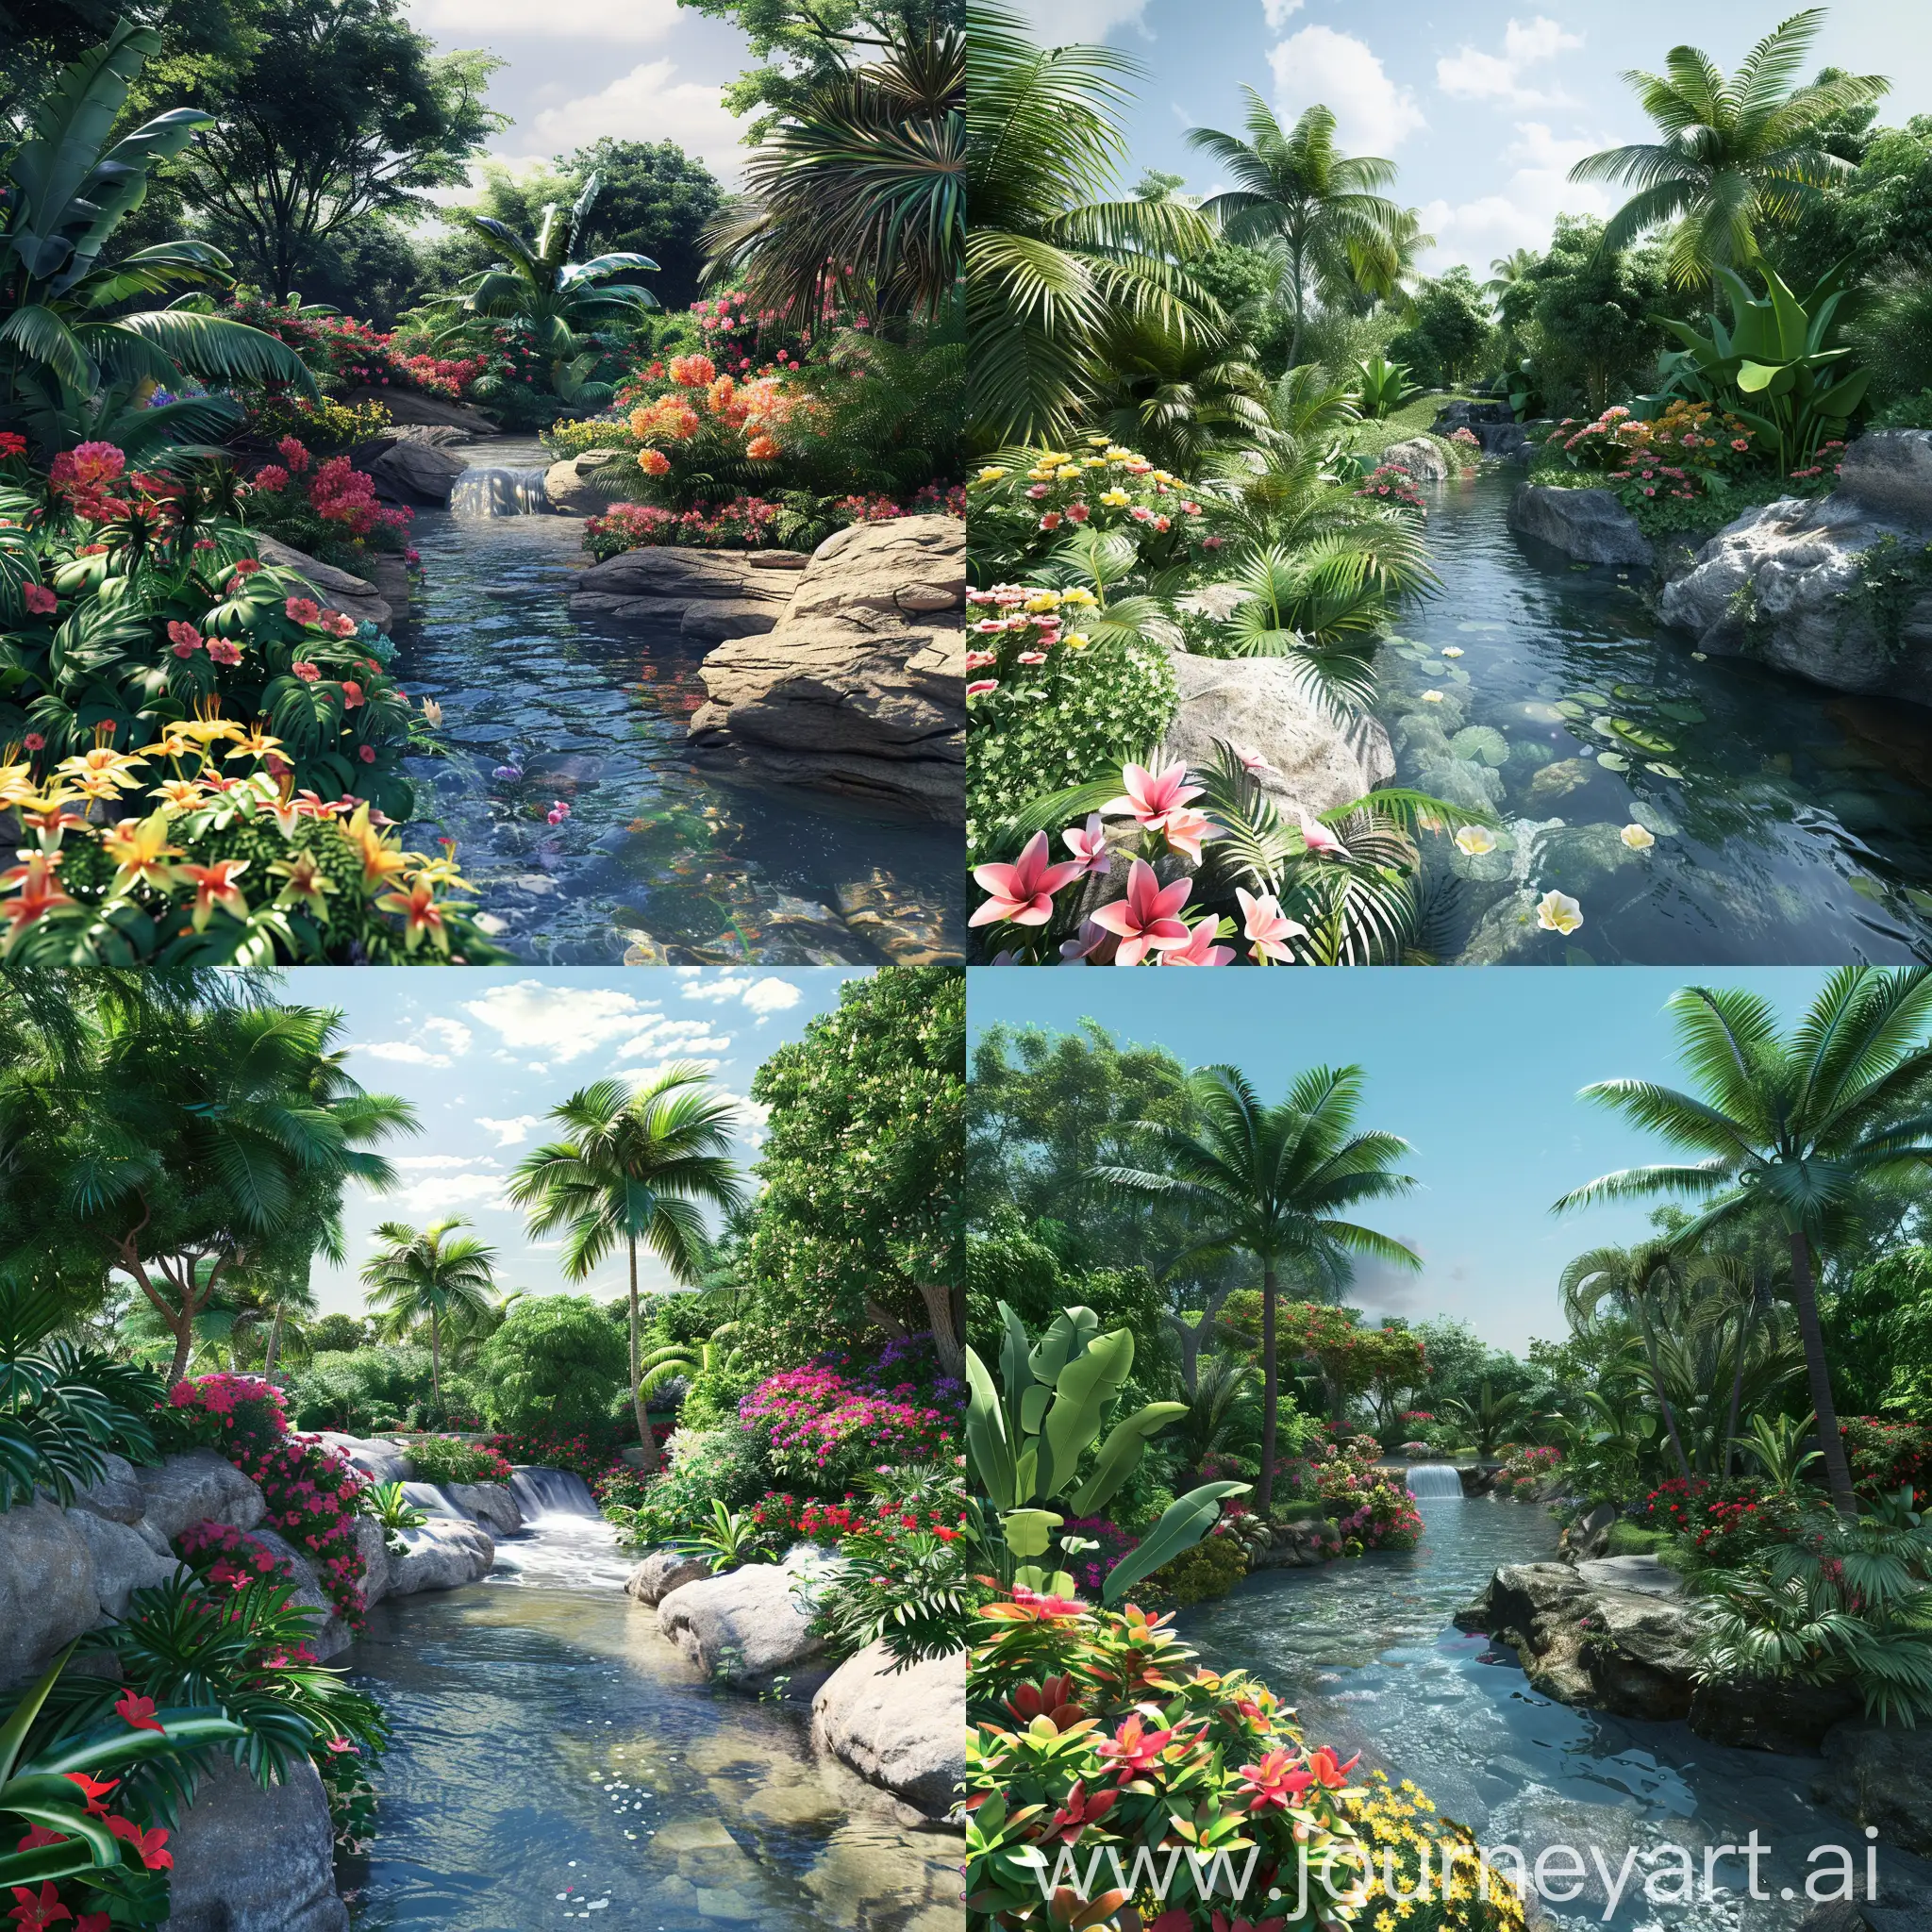 Tranquil-Tropical-Stream-in-a-Lush-Garden-Setting